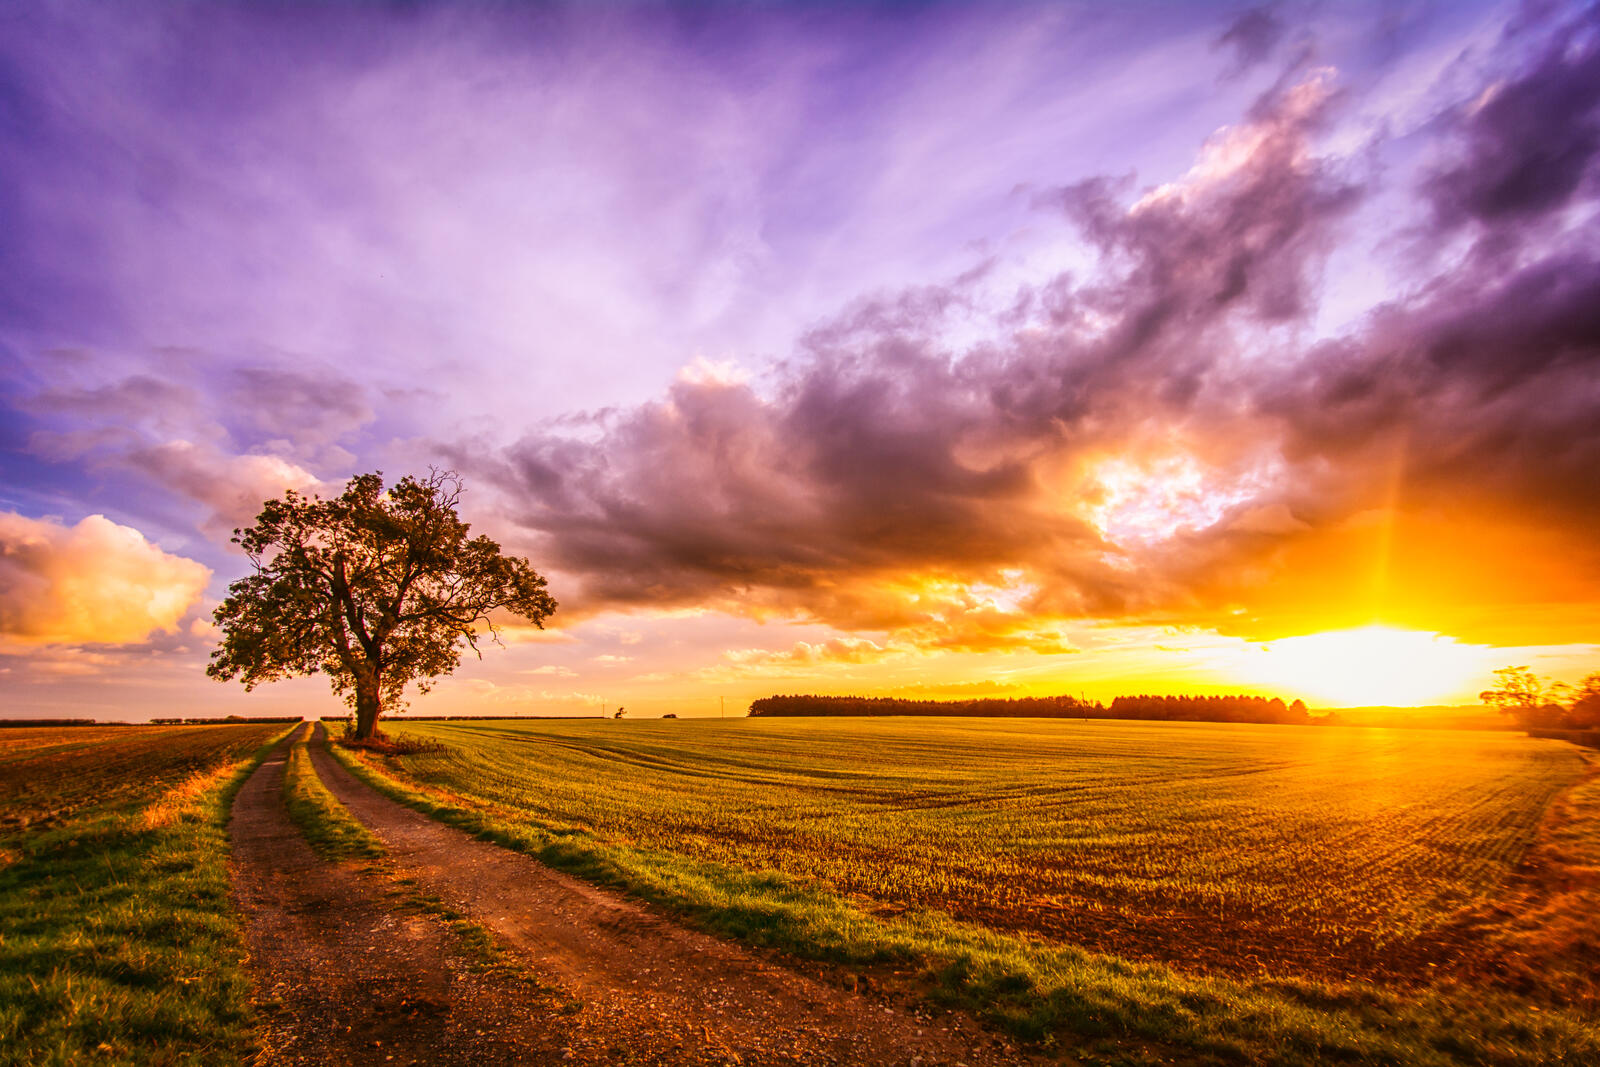 Free photo To download photo of field, sunset